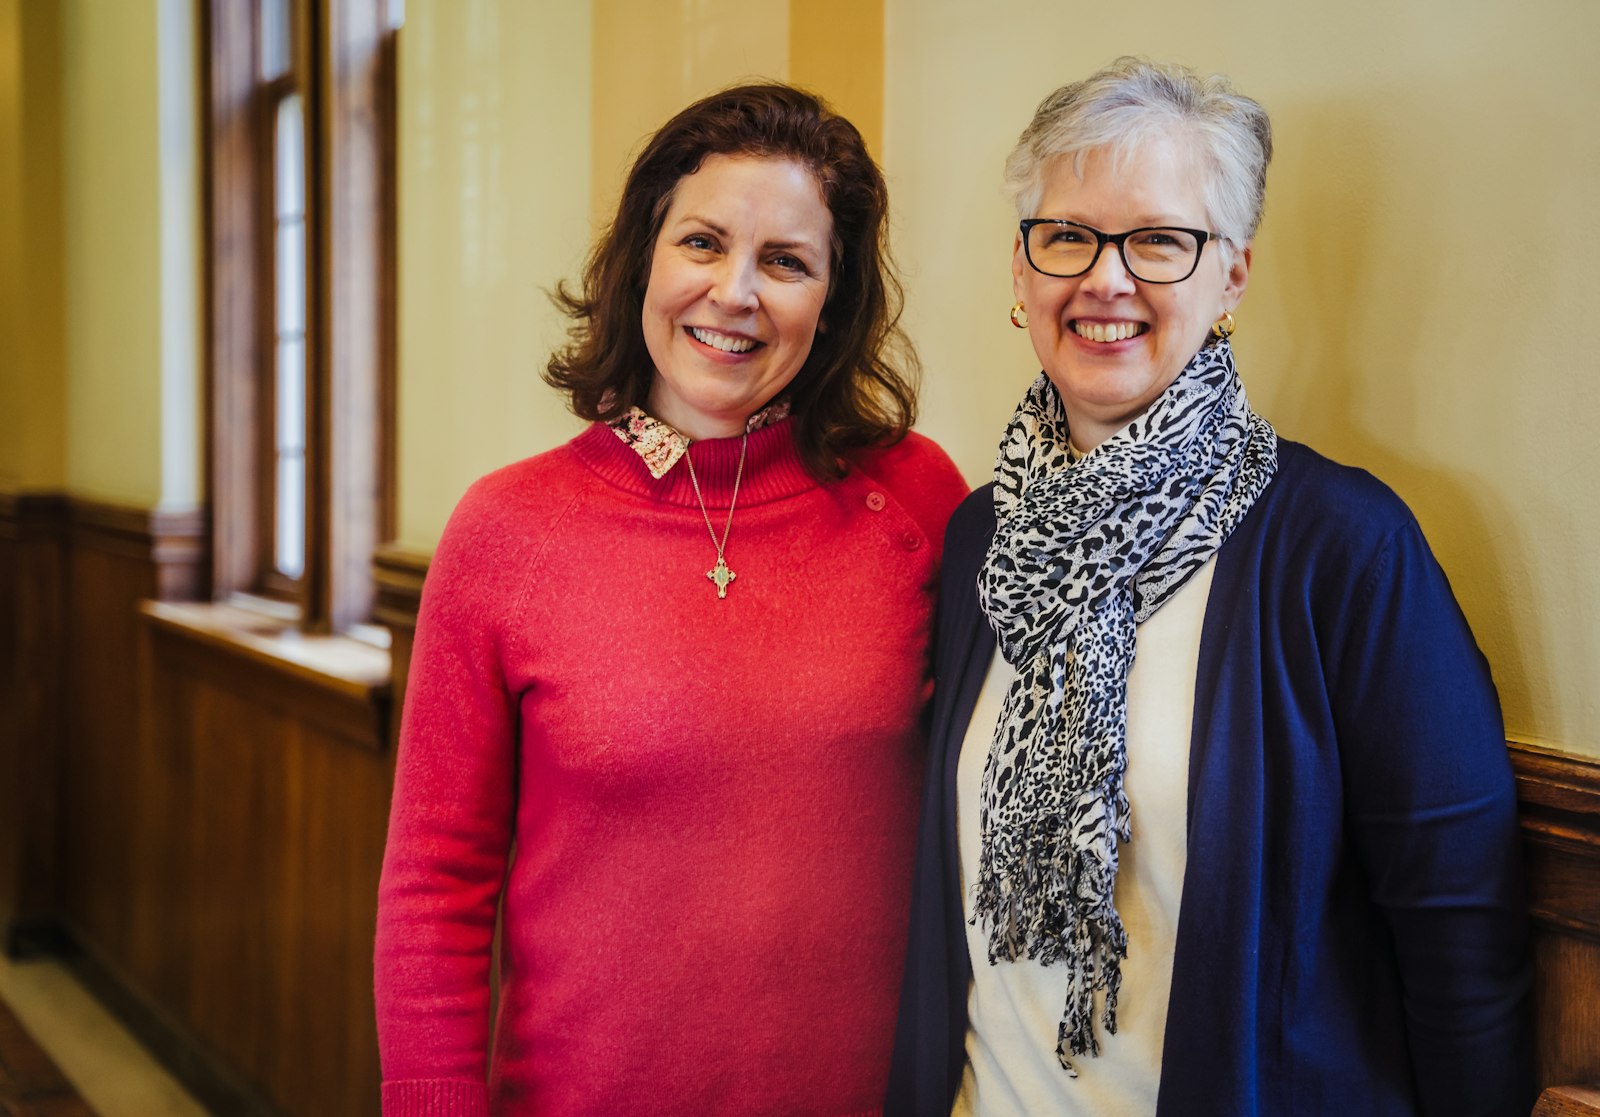 Dr. Sandra Morgan, left, and her colleague, Dr. Catherine Stark, said practicing medicine, particularly during the first few months of the COVID-19 pandemic, proved difficult, but that Christian health care workers helped to set the tone.